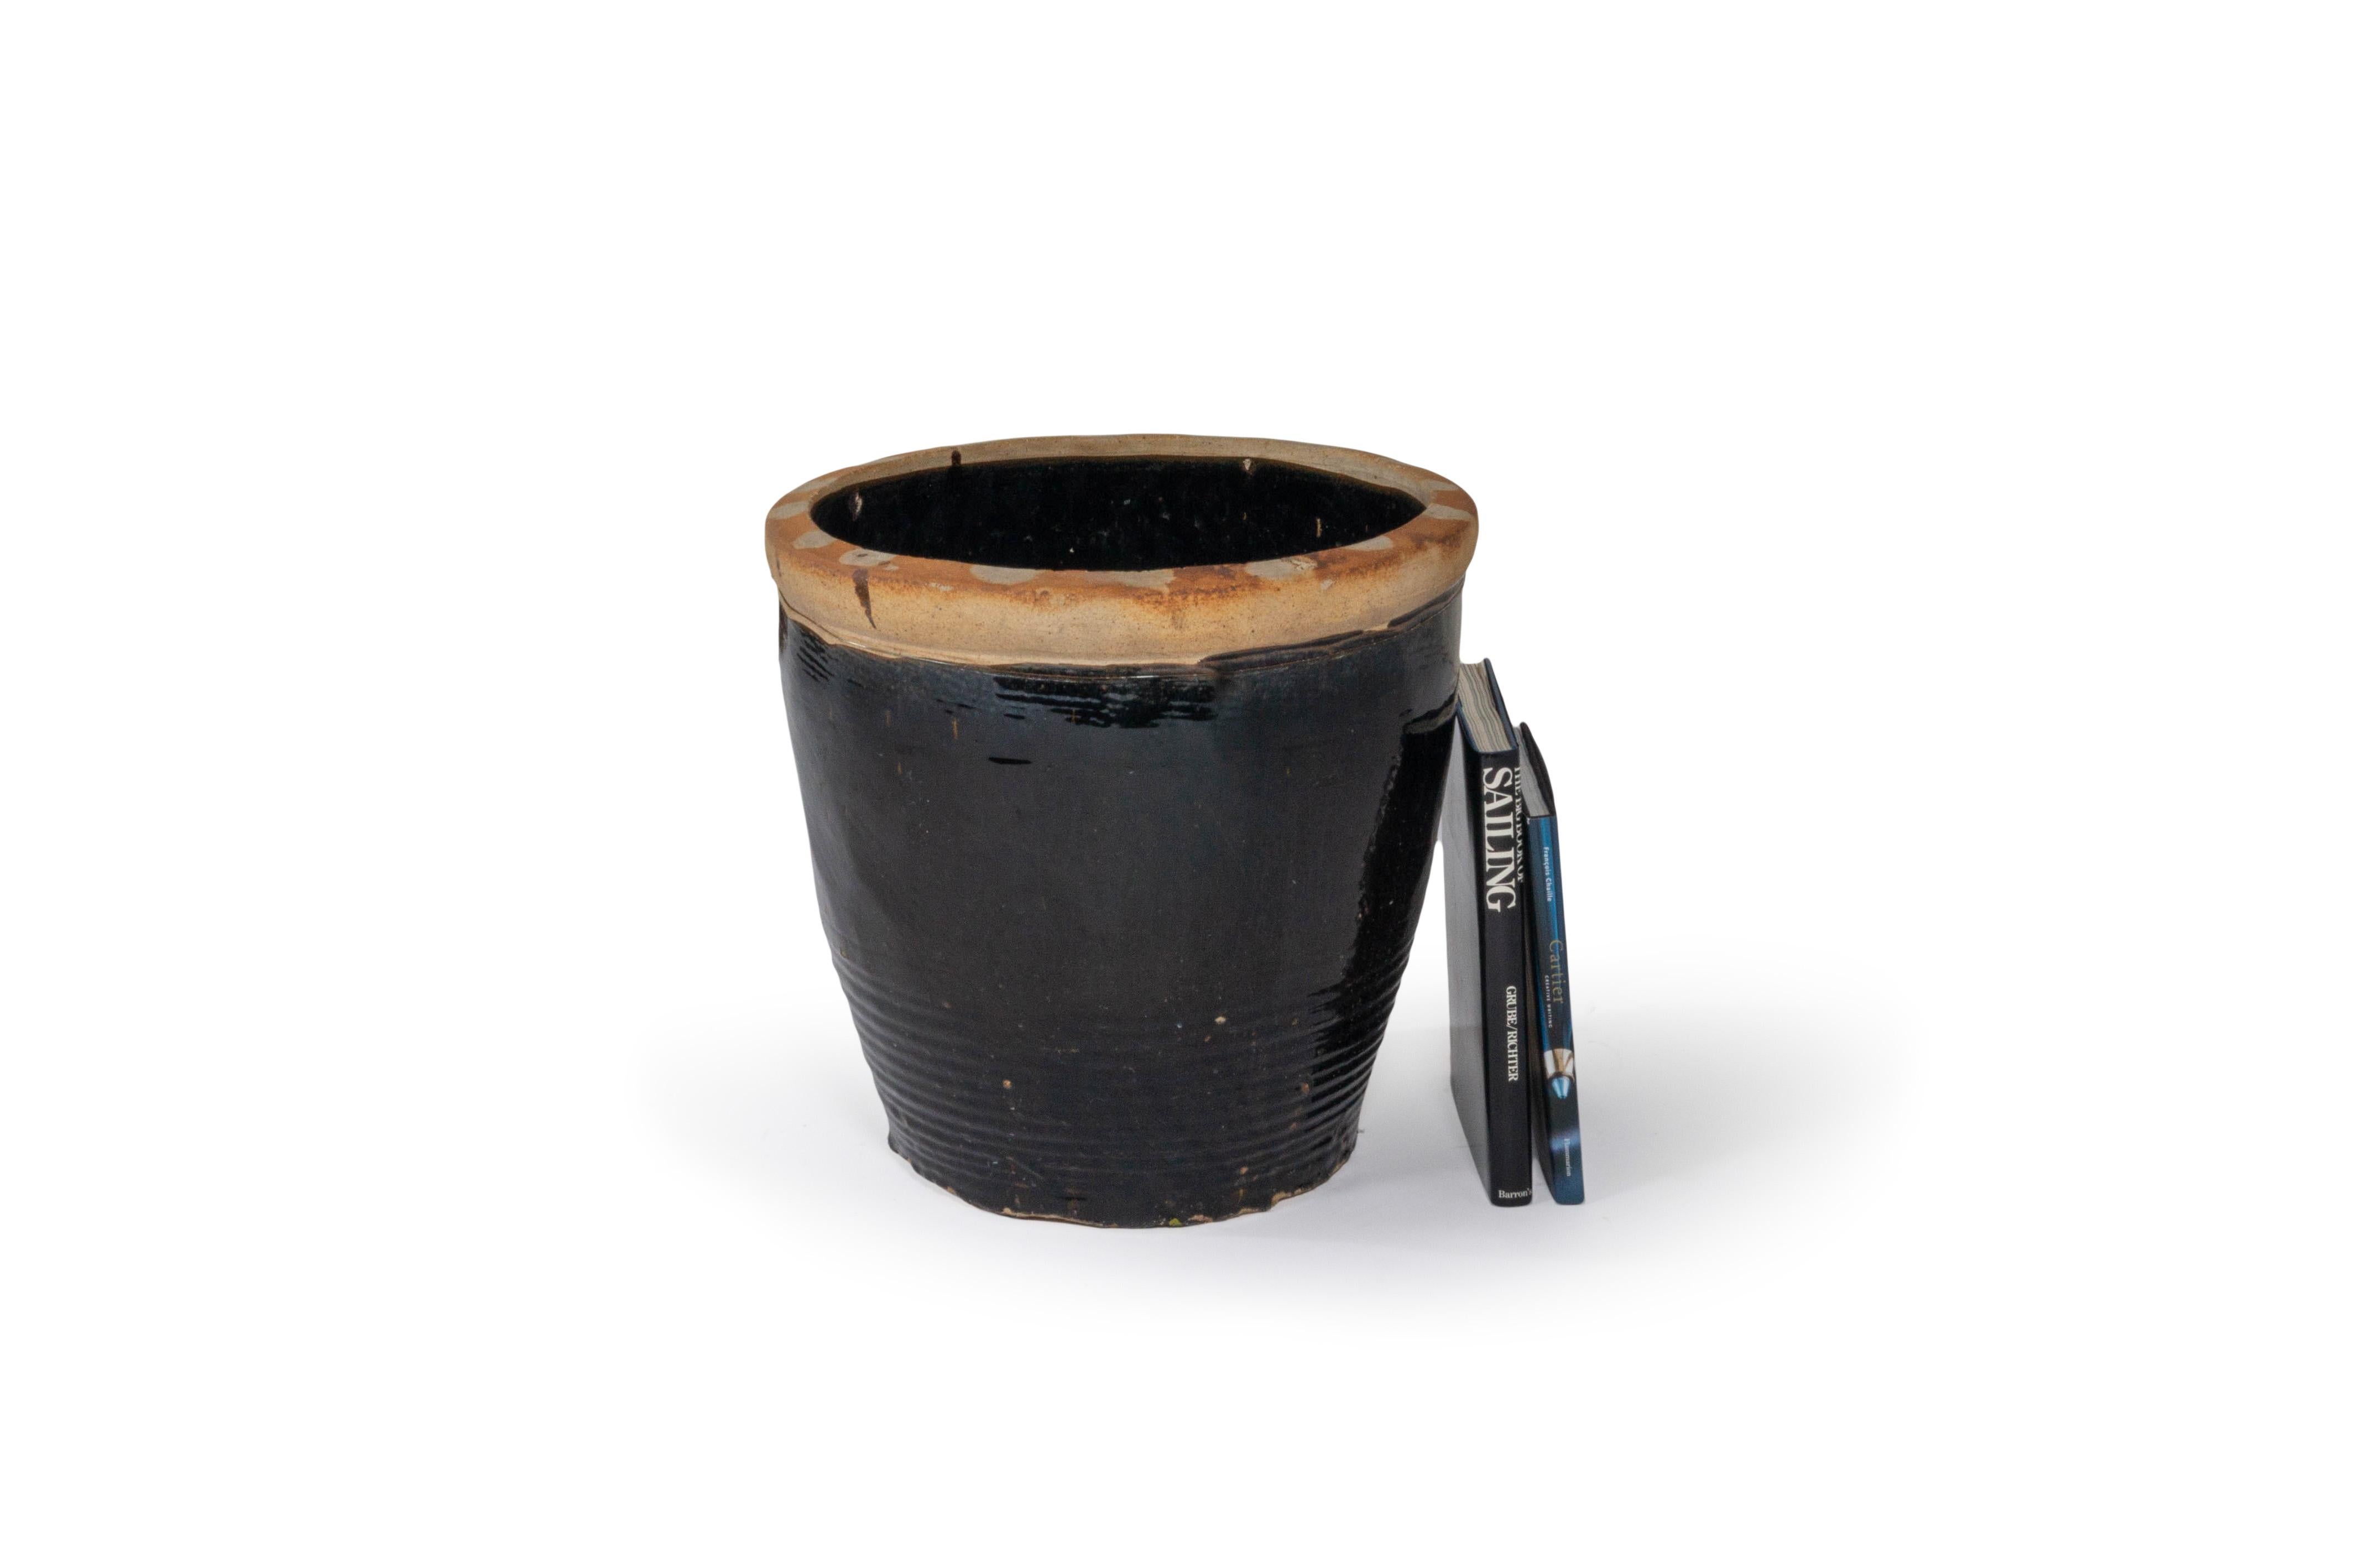 This terra cotta storage vase features a beautiful dark brown glaze which adds beautiful contrast to your garden. 

This piece is a part of Brendan Bass’s one-of-a-kind collection, Le Monde. French for “The World”, the Le Monde collection is made